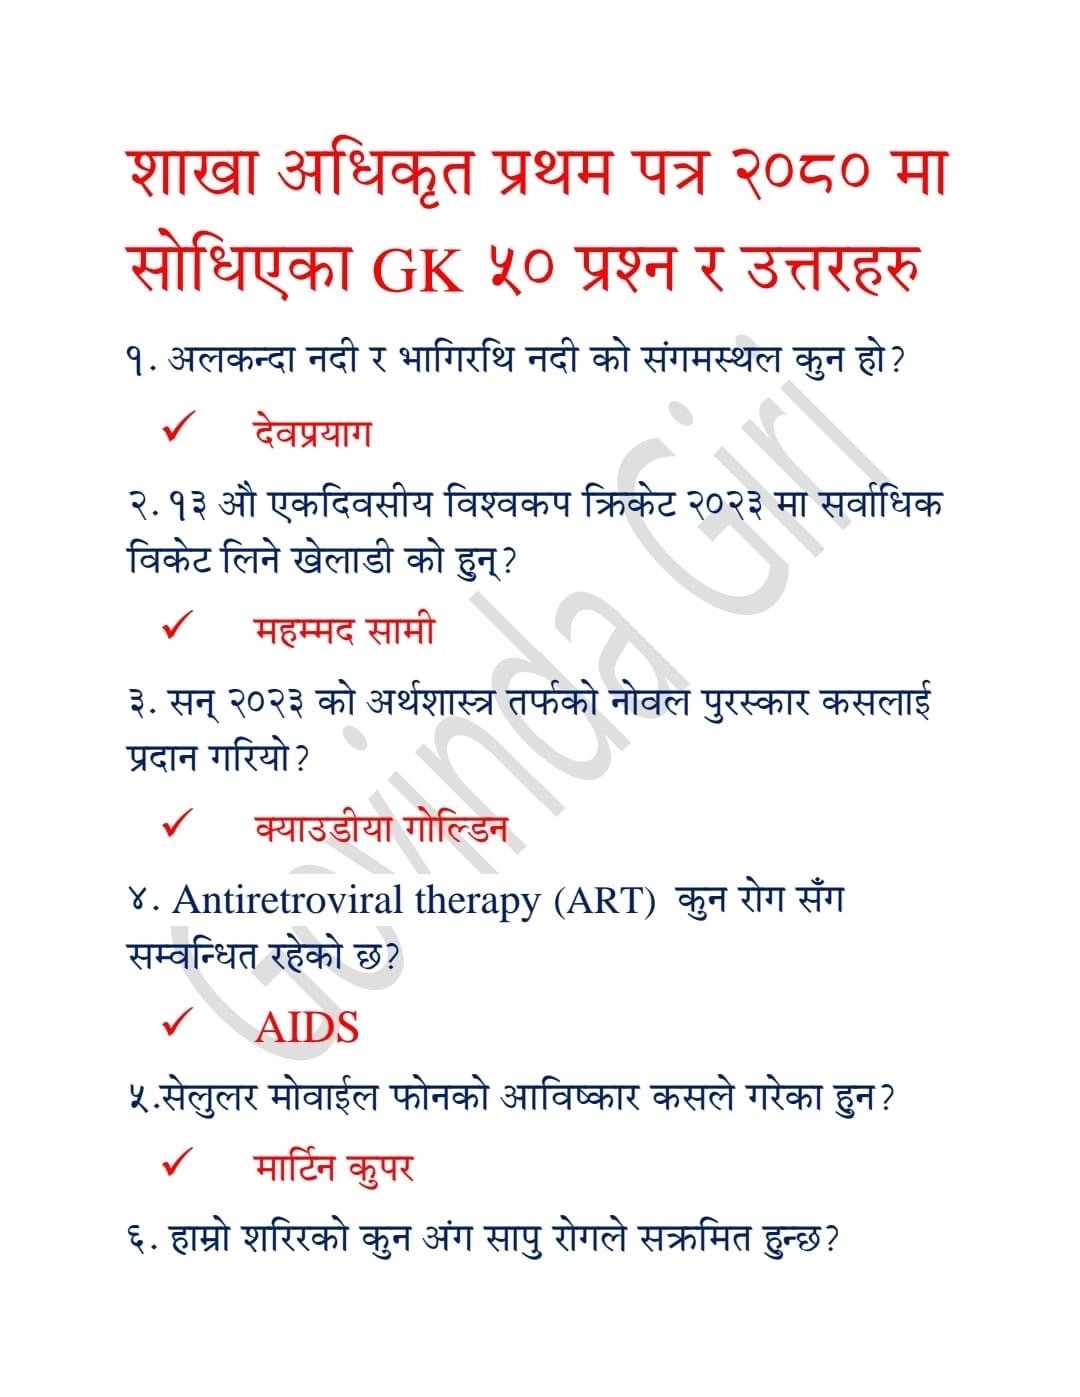 Sakha Adhikrit Loksewa Questions 2080 | Section Officer Loksewa Exam Questions 2080 | Sakha Adhikrit Loksewa Exam Questions Answer 2080